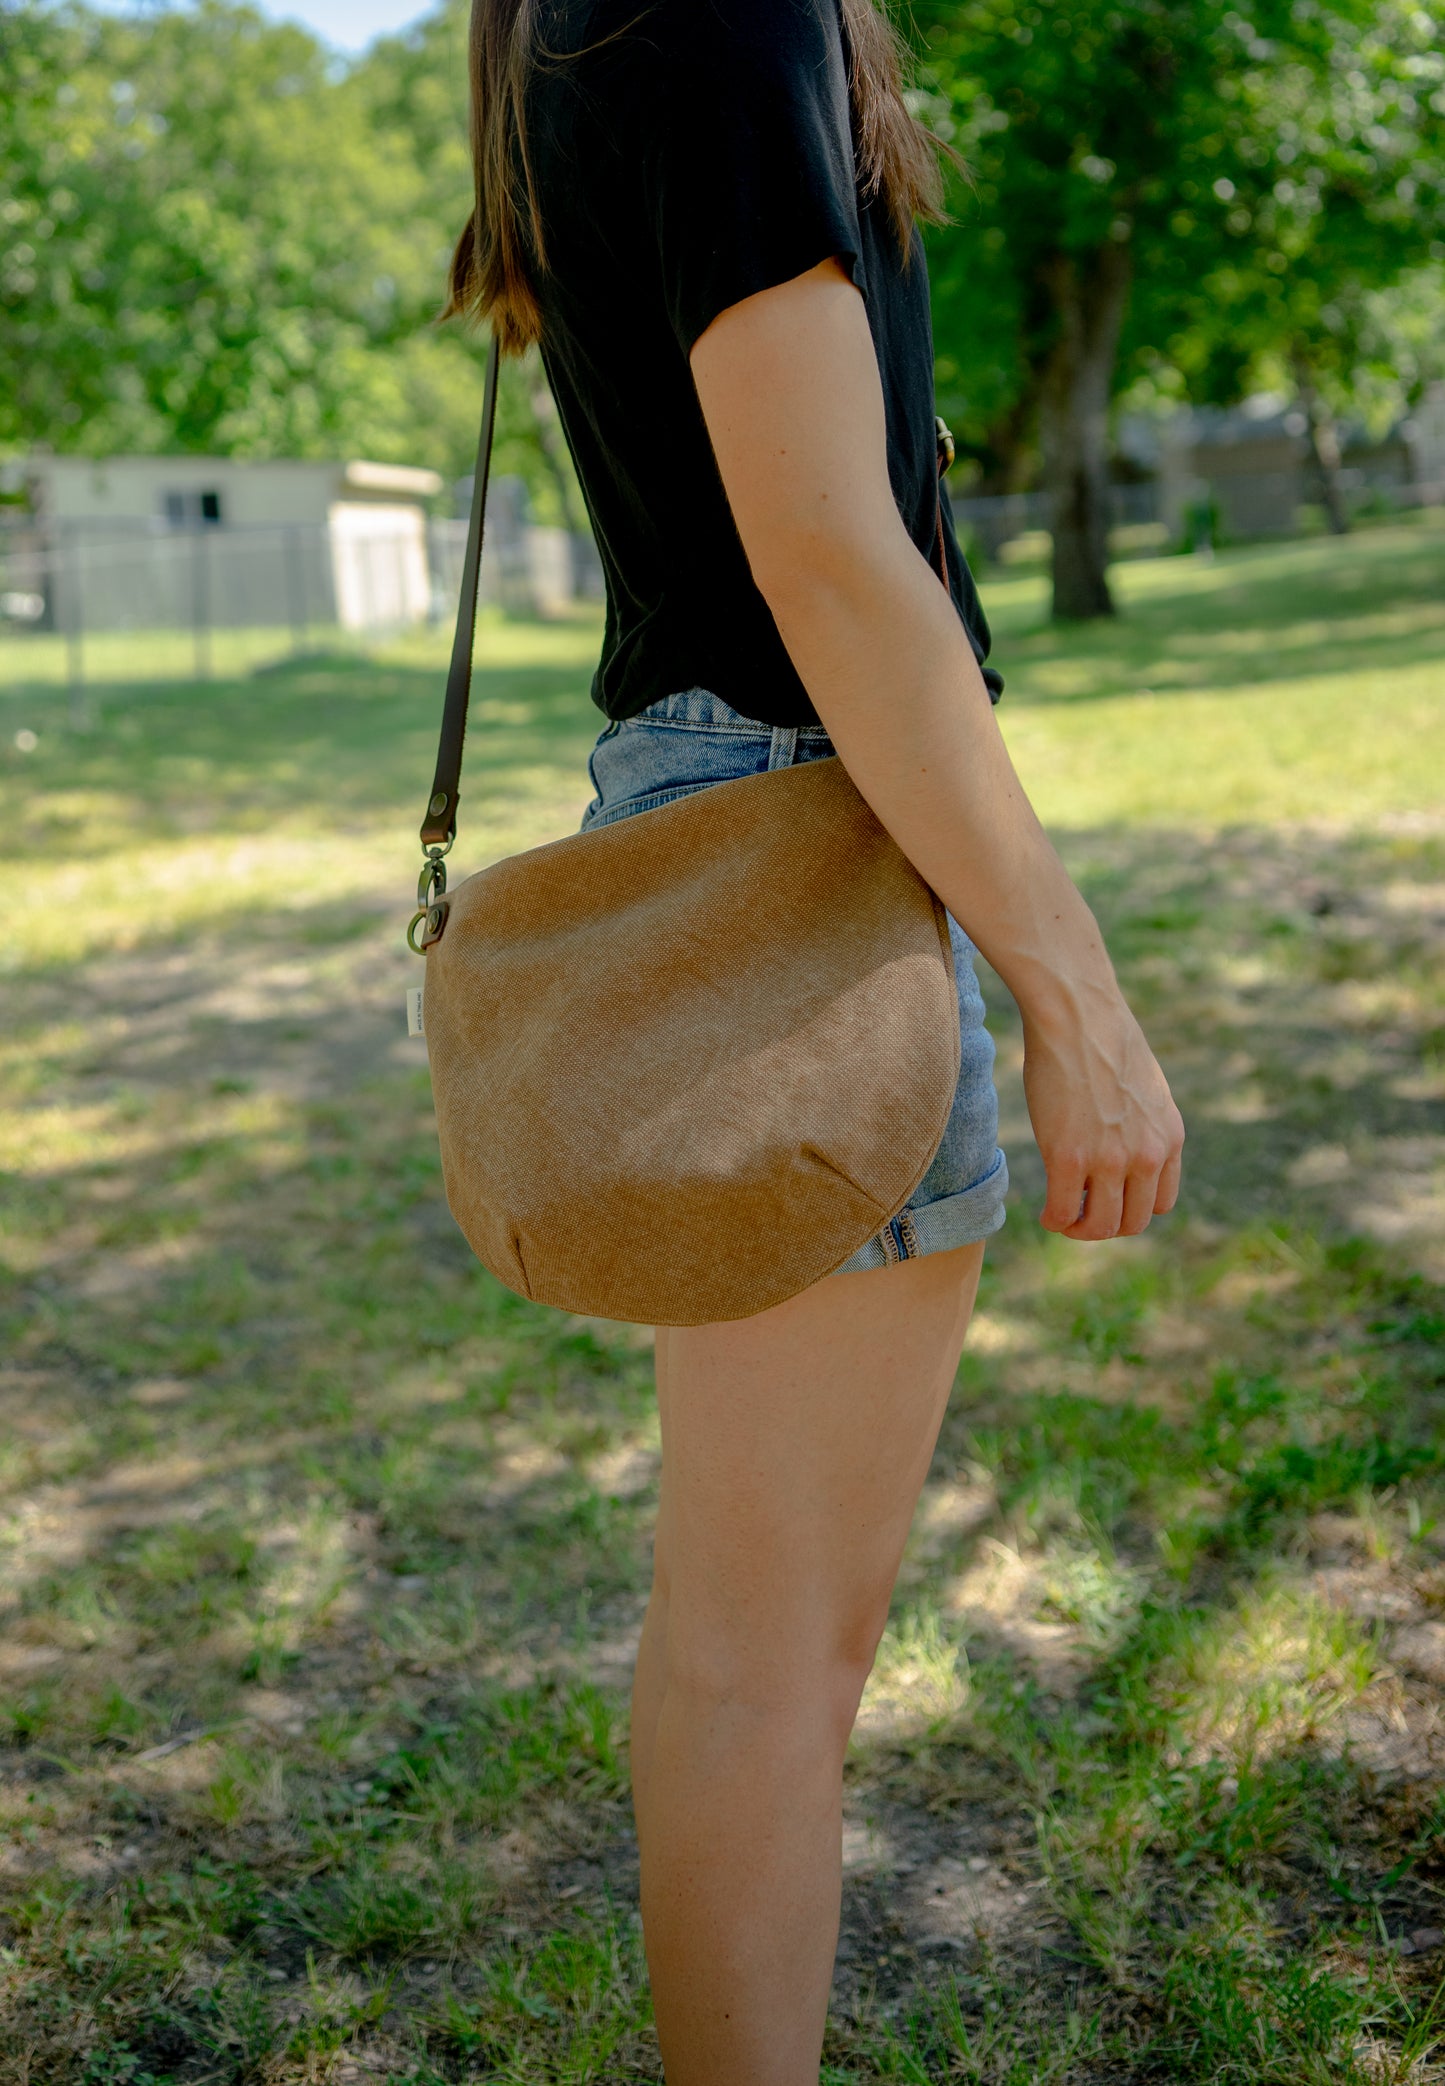 Thai Crossbody Bag with Leather Strap